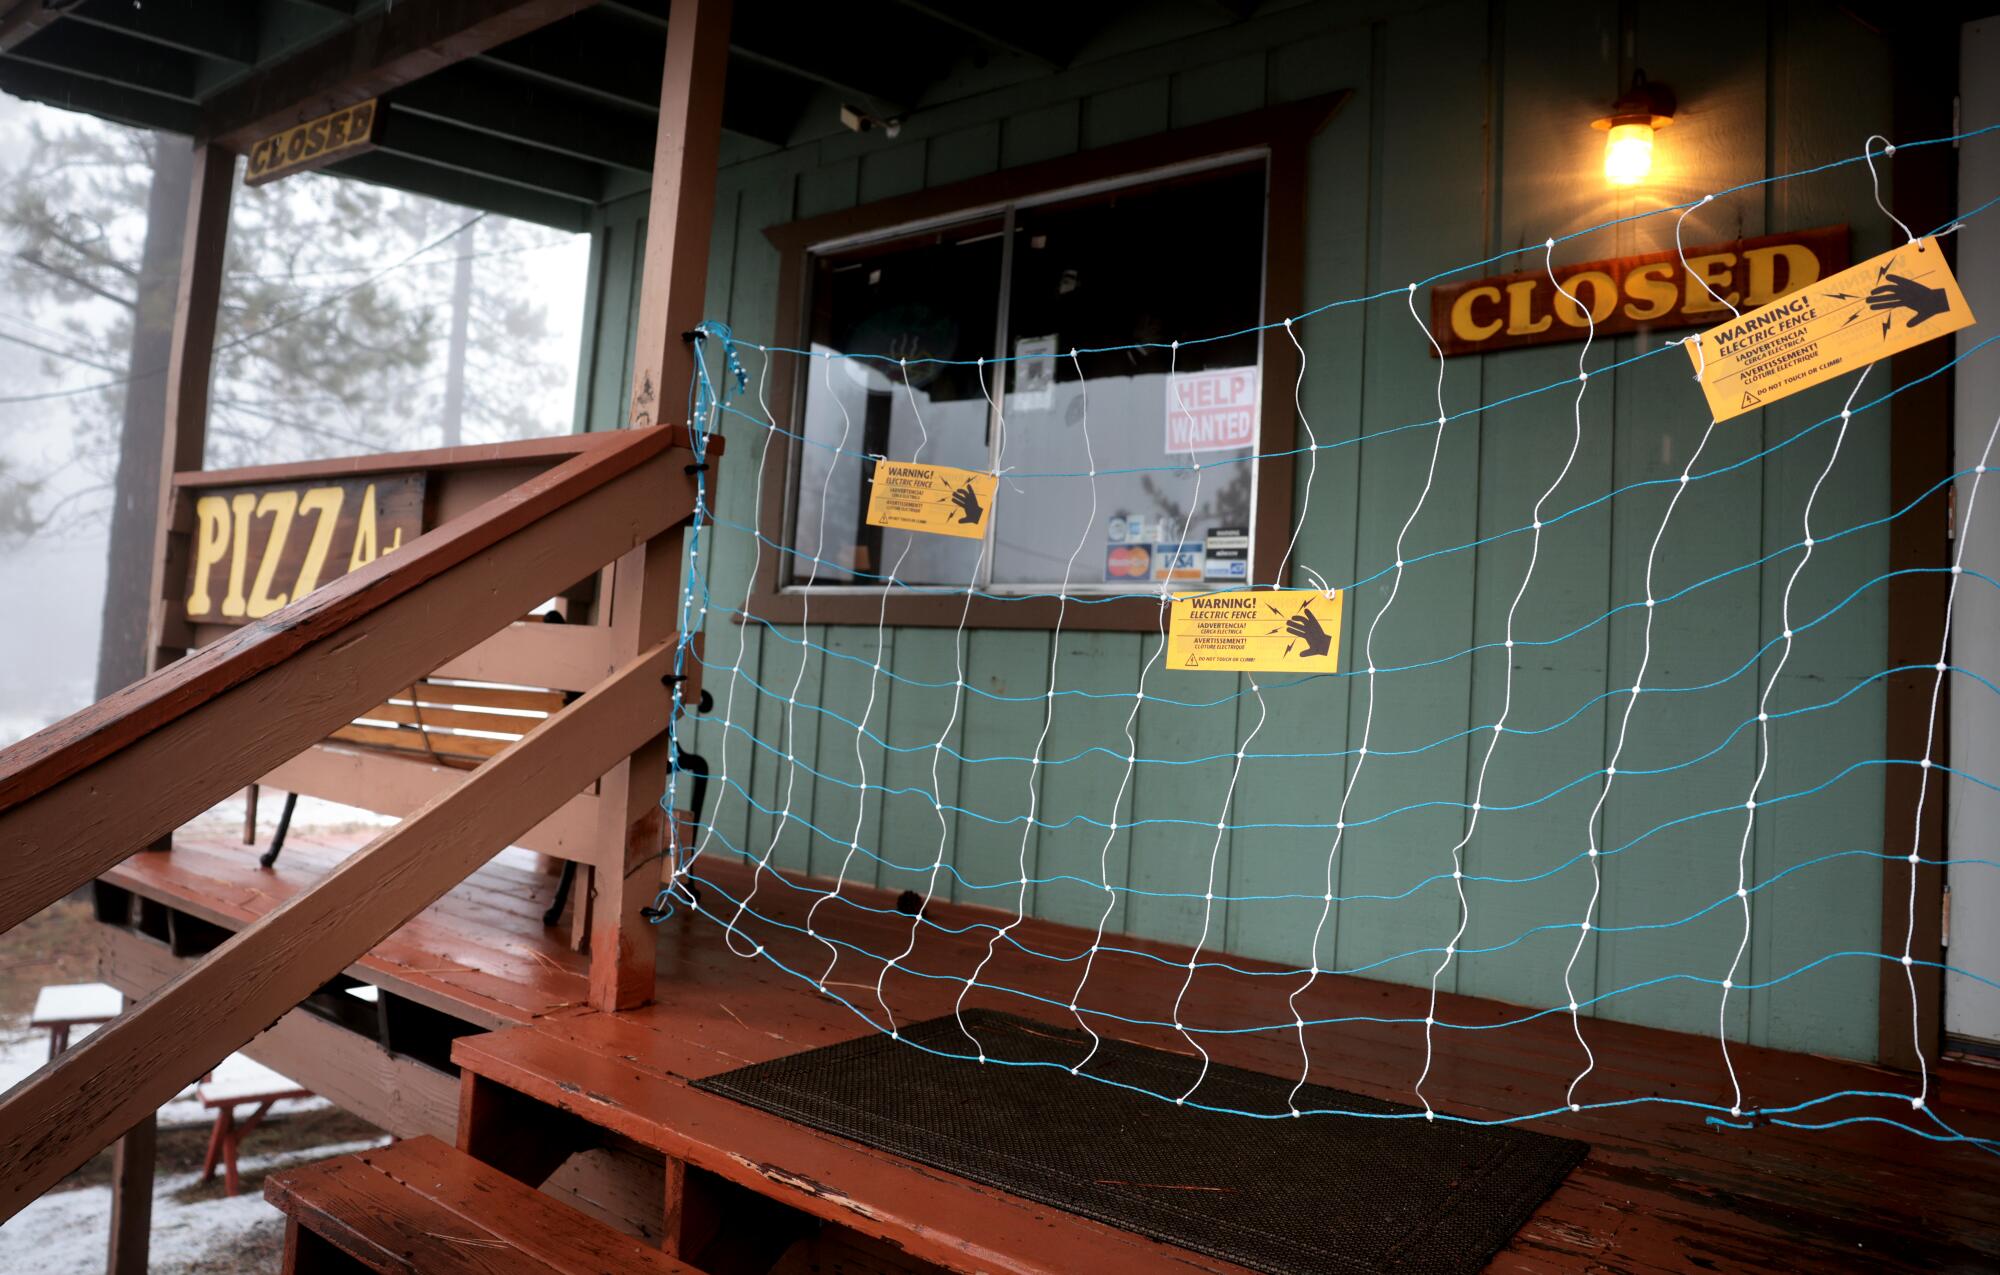 A net hangs across the porch entrance of a pizza restaurant with a Closed sign and a light on